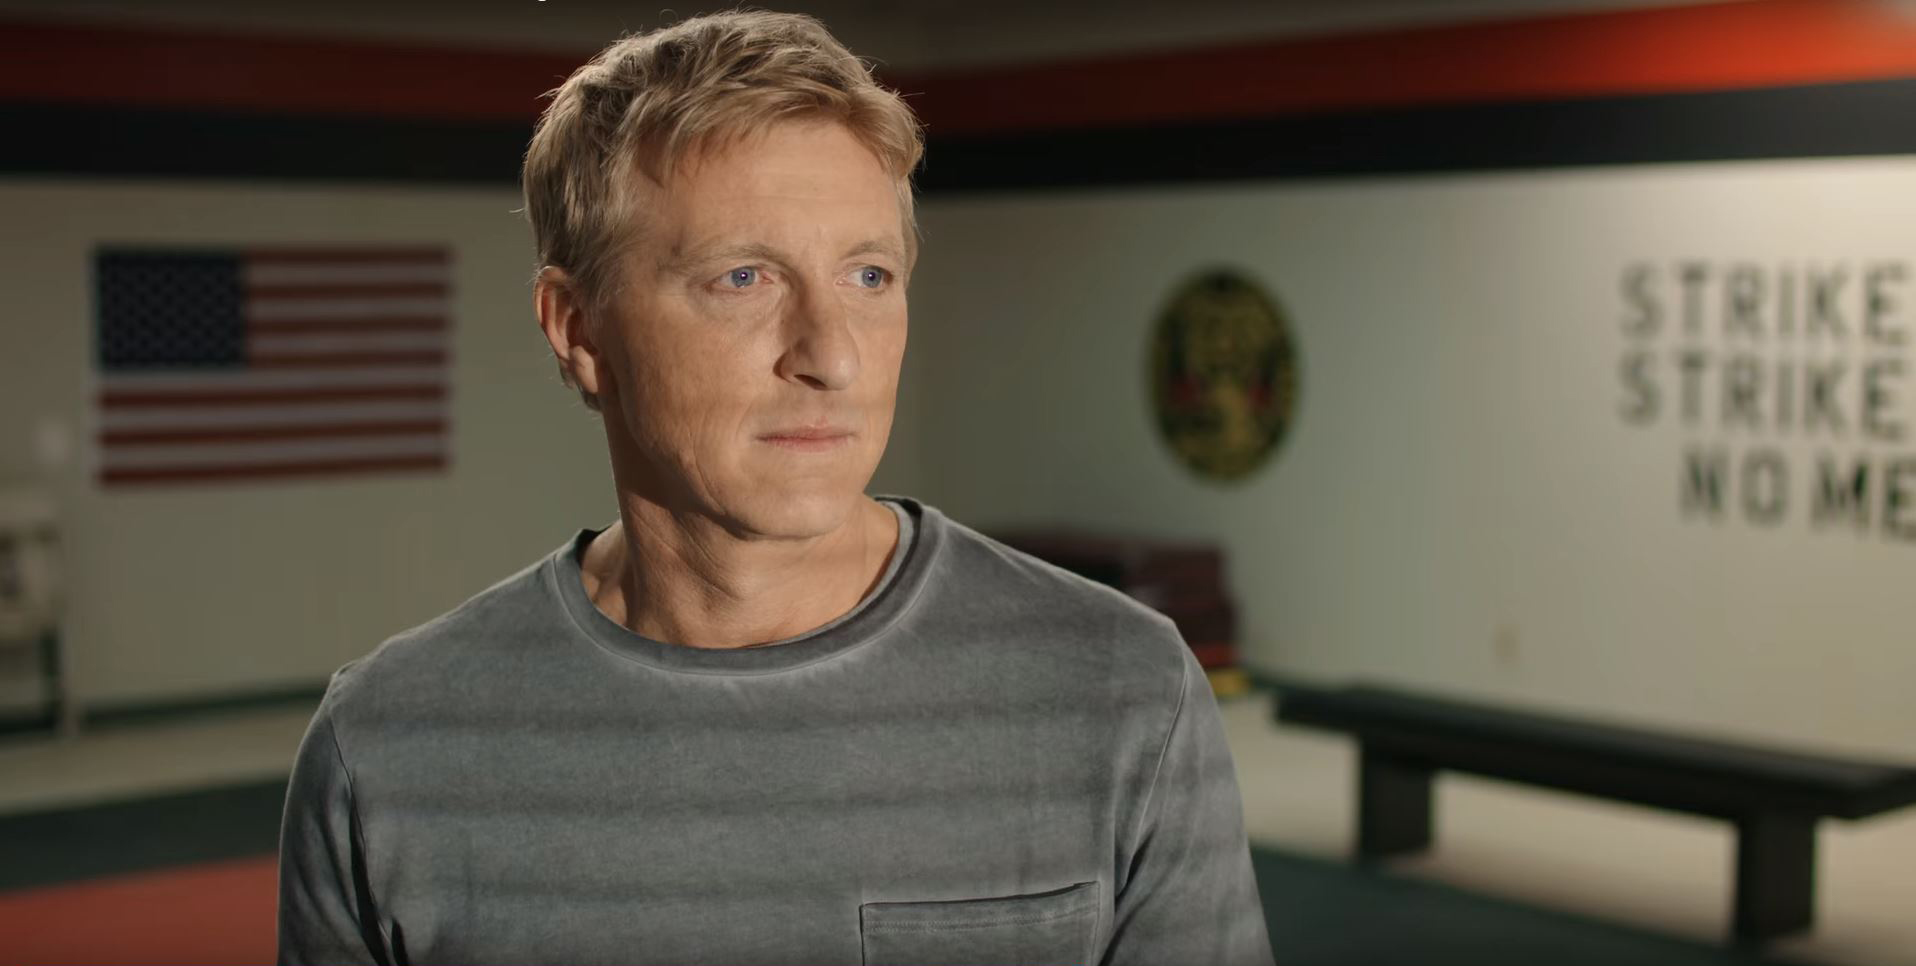 PHOTO: This screengrab shows William Zabka in a scene from the official trailer for "Cobra Kai," a YouTube Red Original Series premiering May 2, 2018.